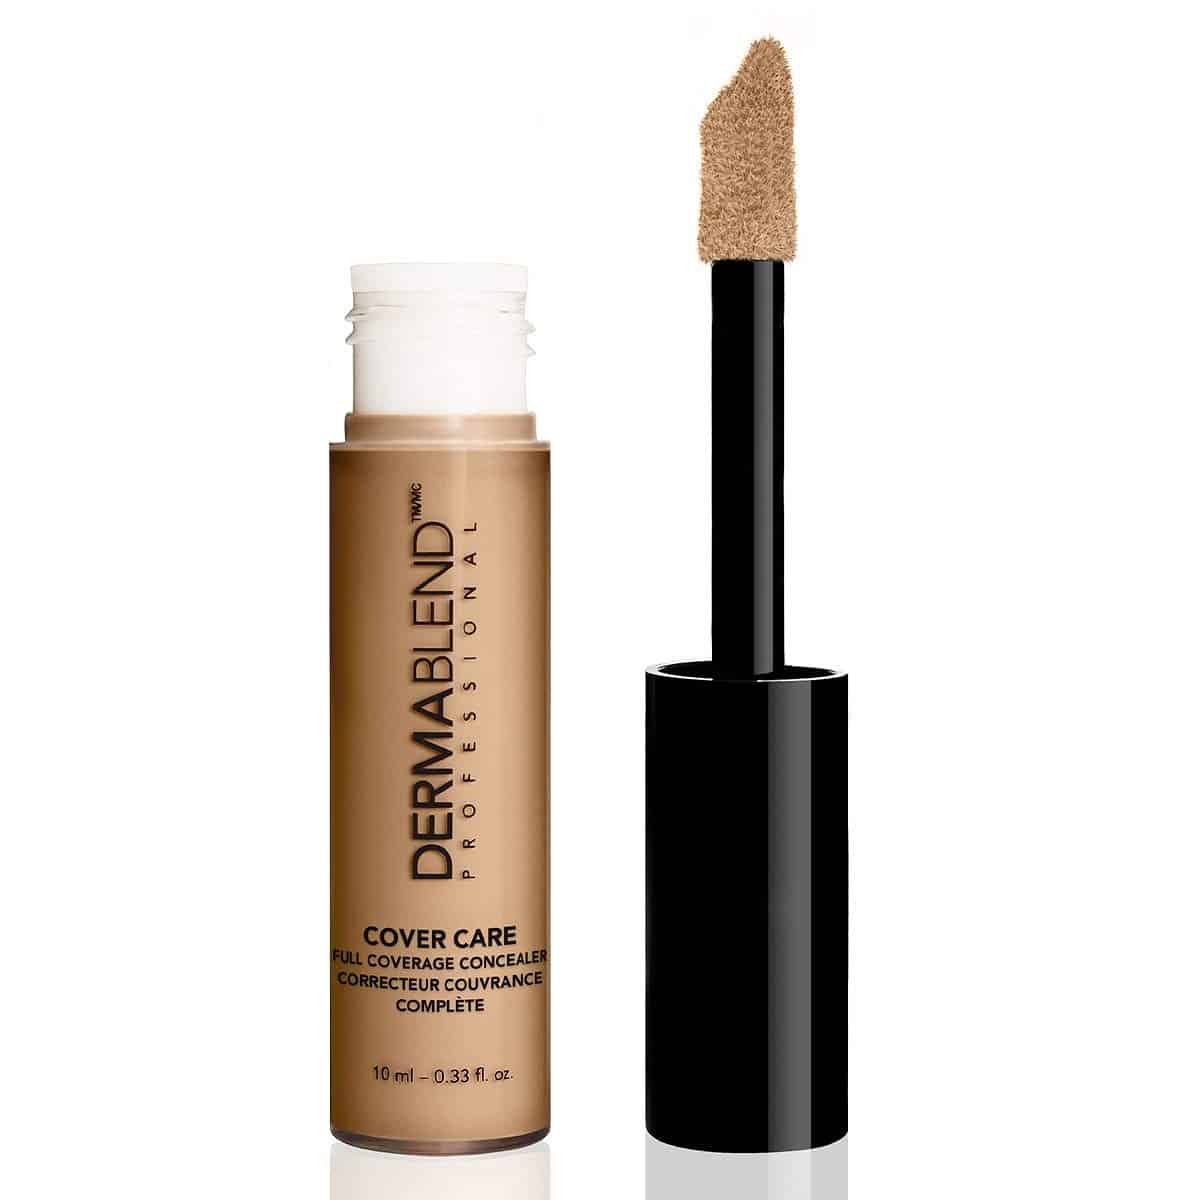 The 15 Best Moisturizing Concealers for Dry Skin of 2021